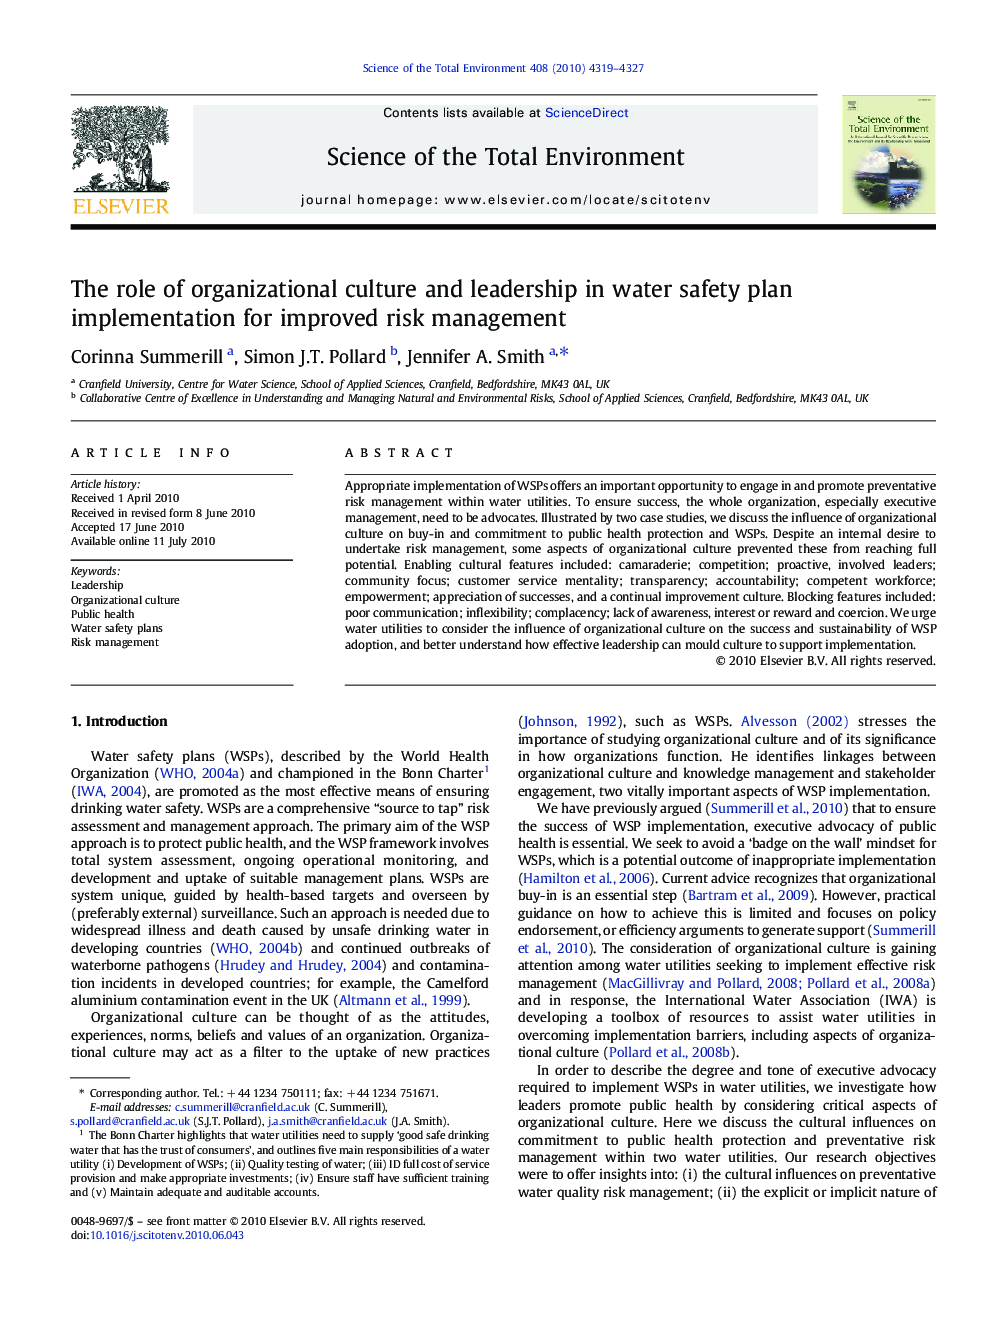 The role of organizational culture and leadership in water safety plan implementation for improved risk management